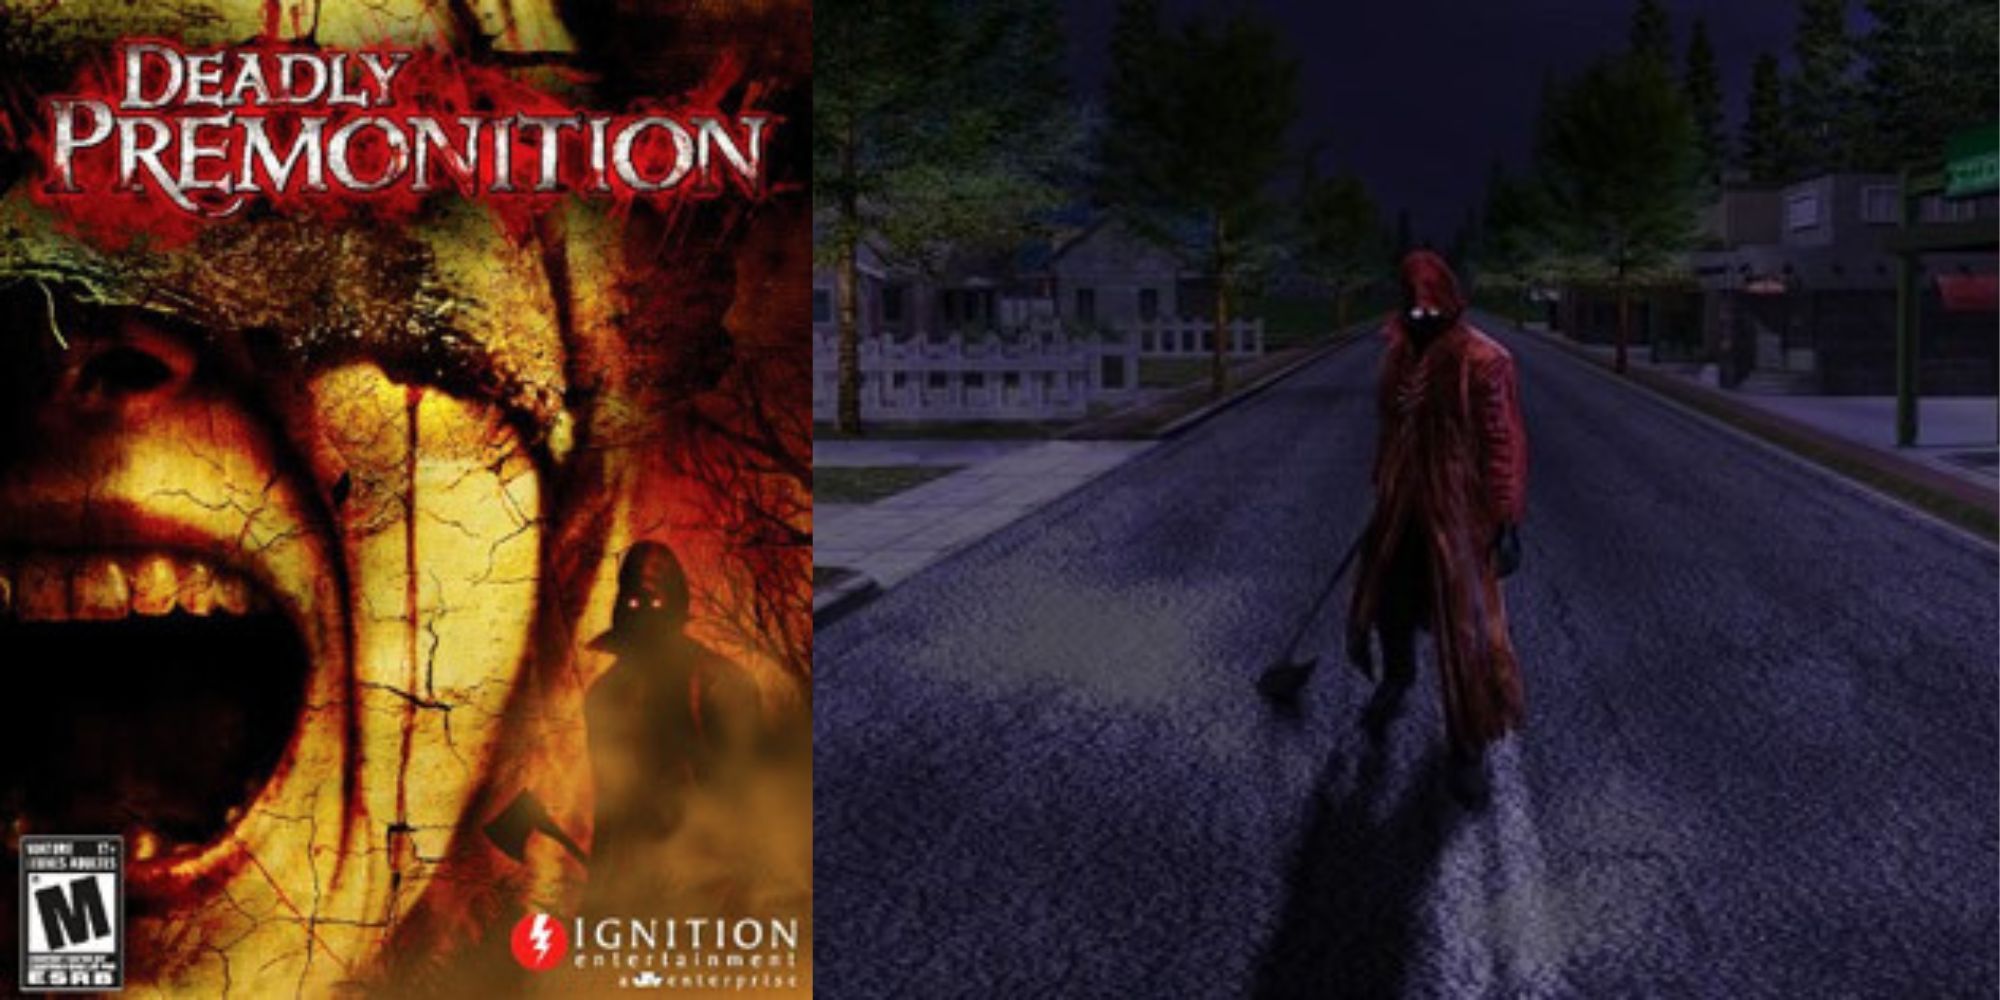 Deadly Premonition cover art and in-game image of hooded figure